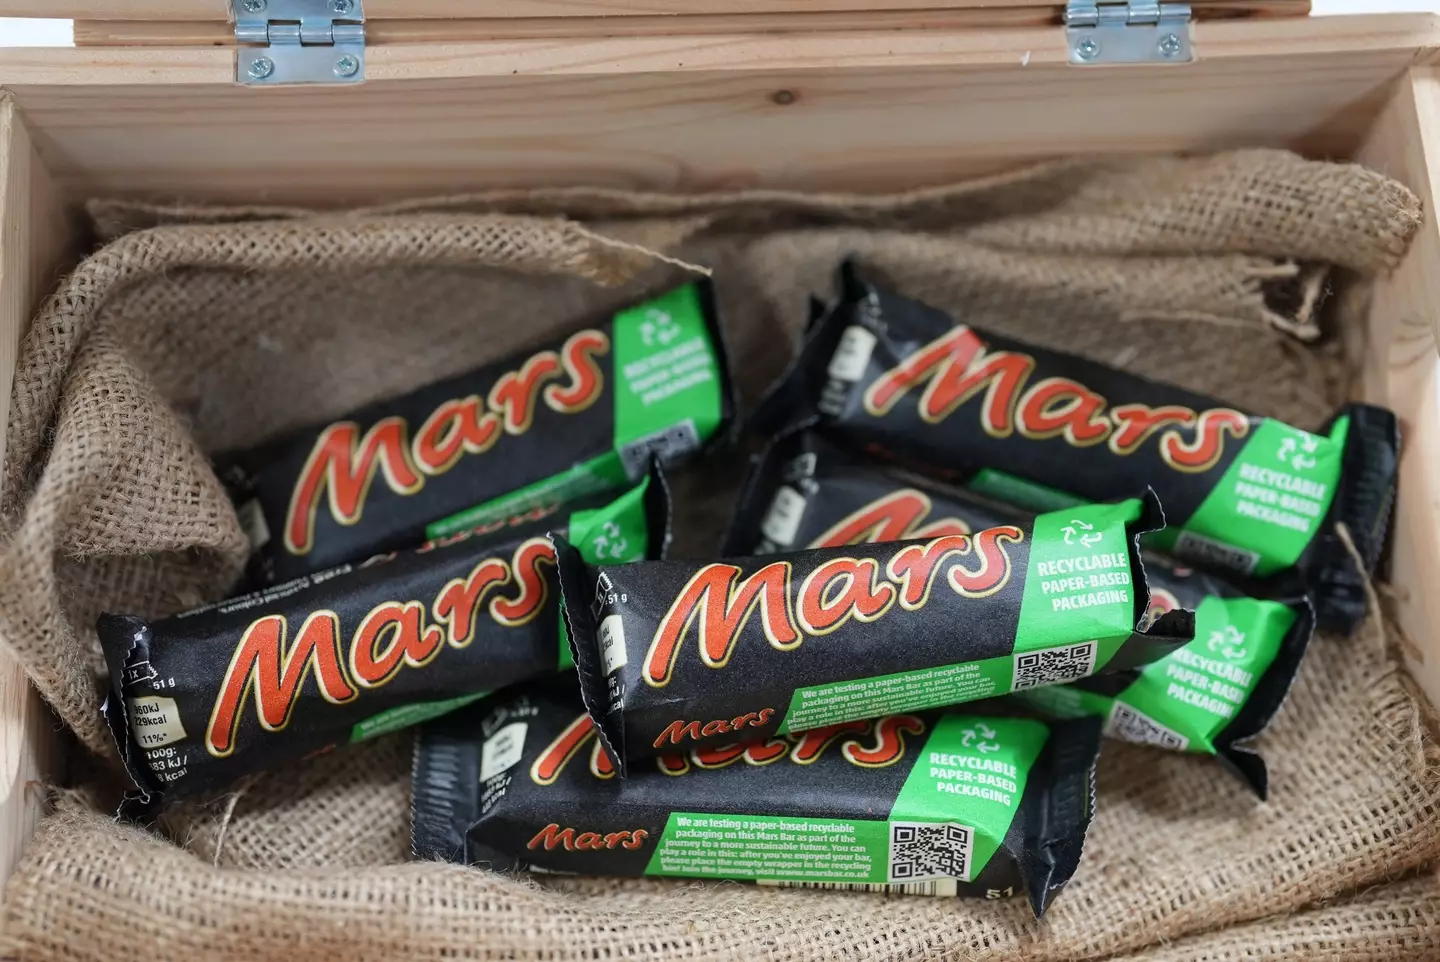 Mars is trialing paper wrappers for the first time.